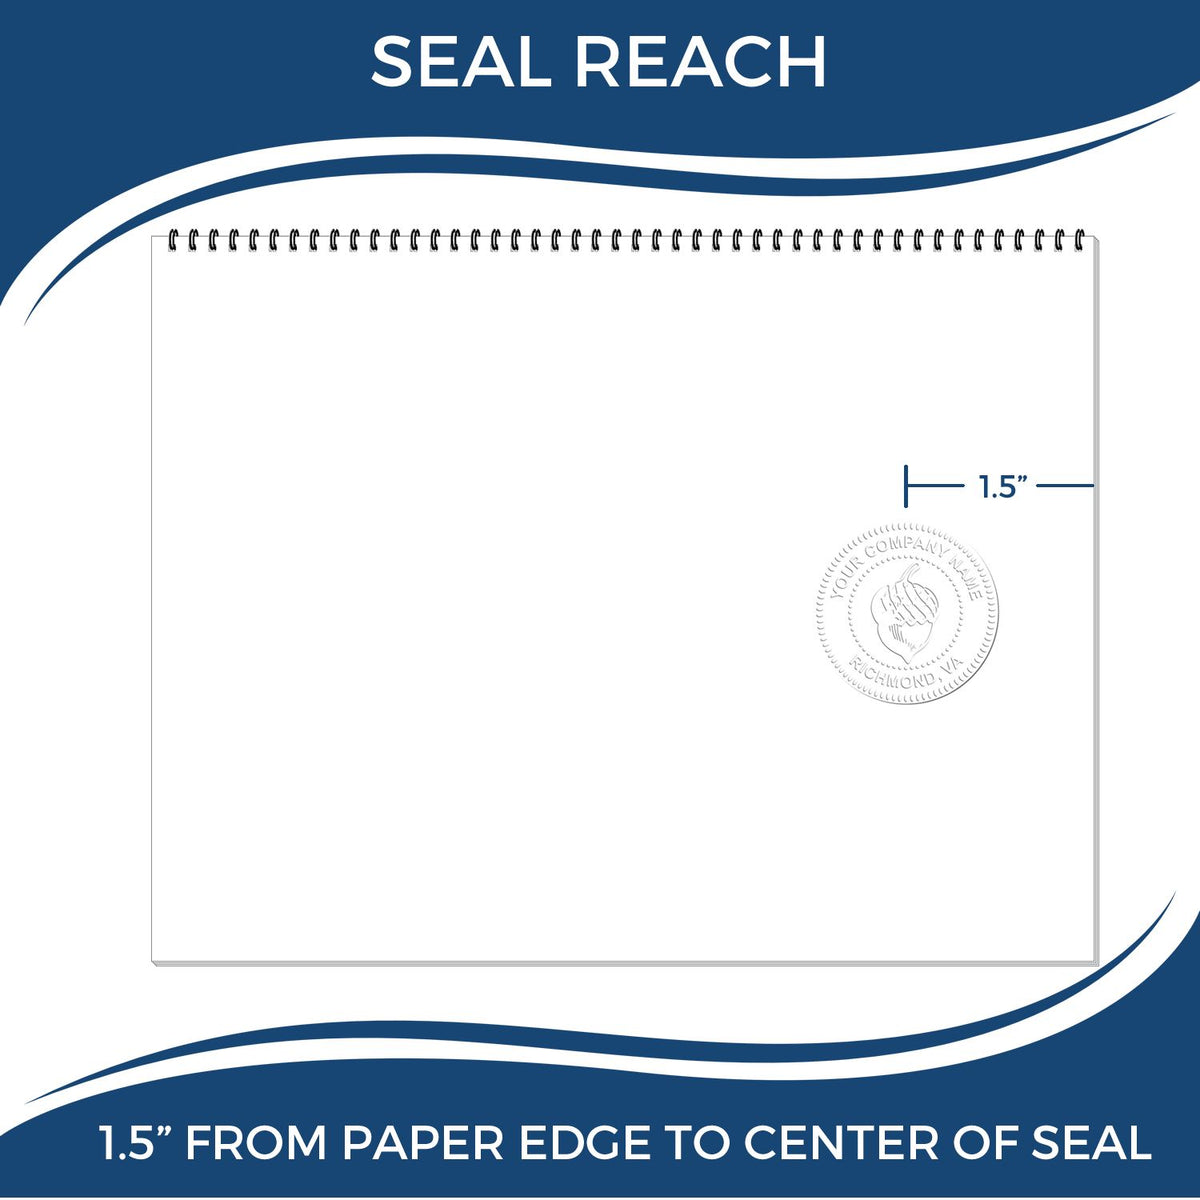 An infographic showing the seal reach which is represented by a ruler and a miniature seal image of the Handheld Michigan Architect Seal Embosser